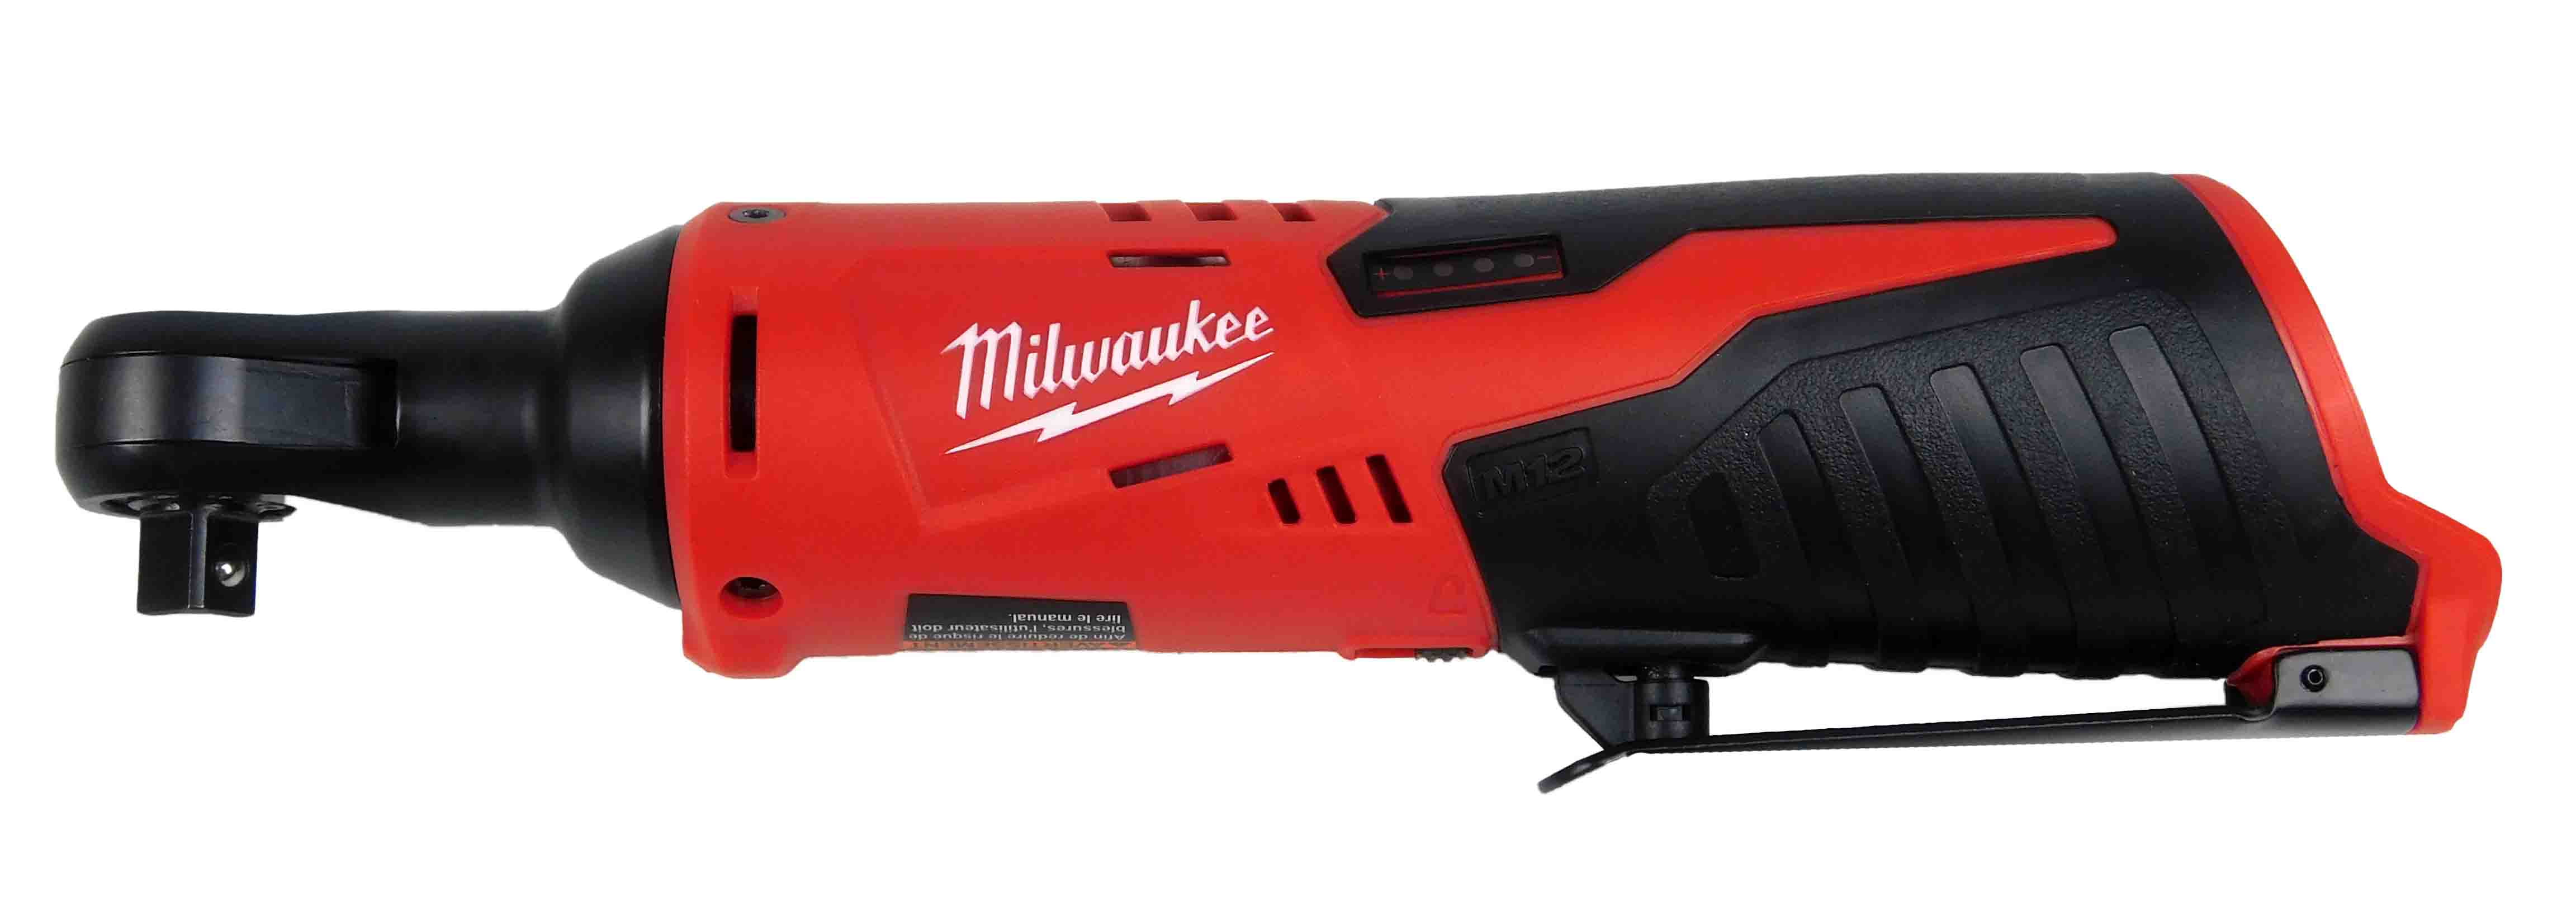 Milwaukee 2457-20 12-Volt M12 Lithium Ion 3/8 in. Cordless Ratchet Bare Tool 